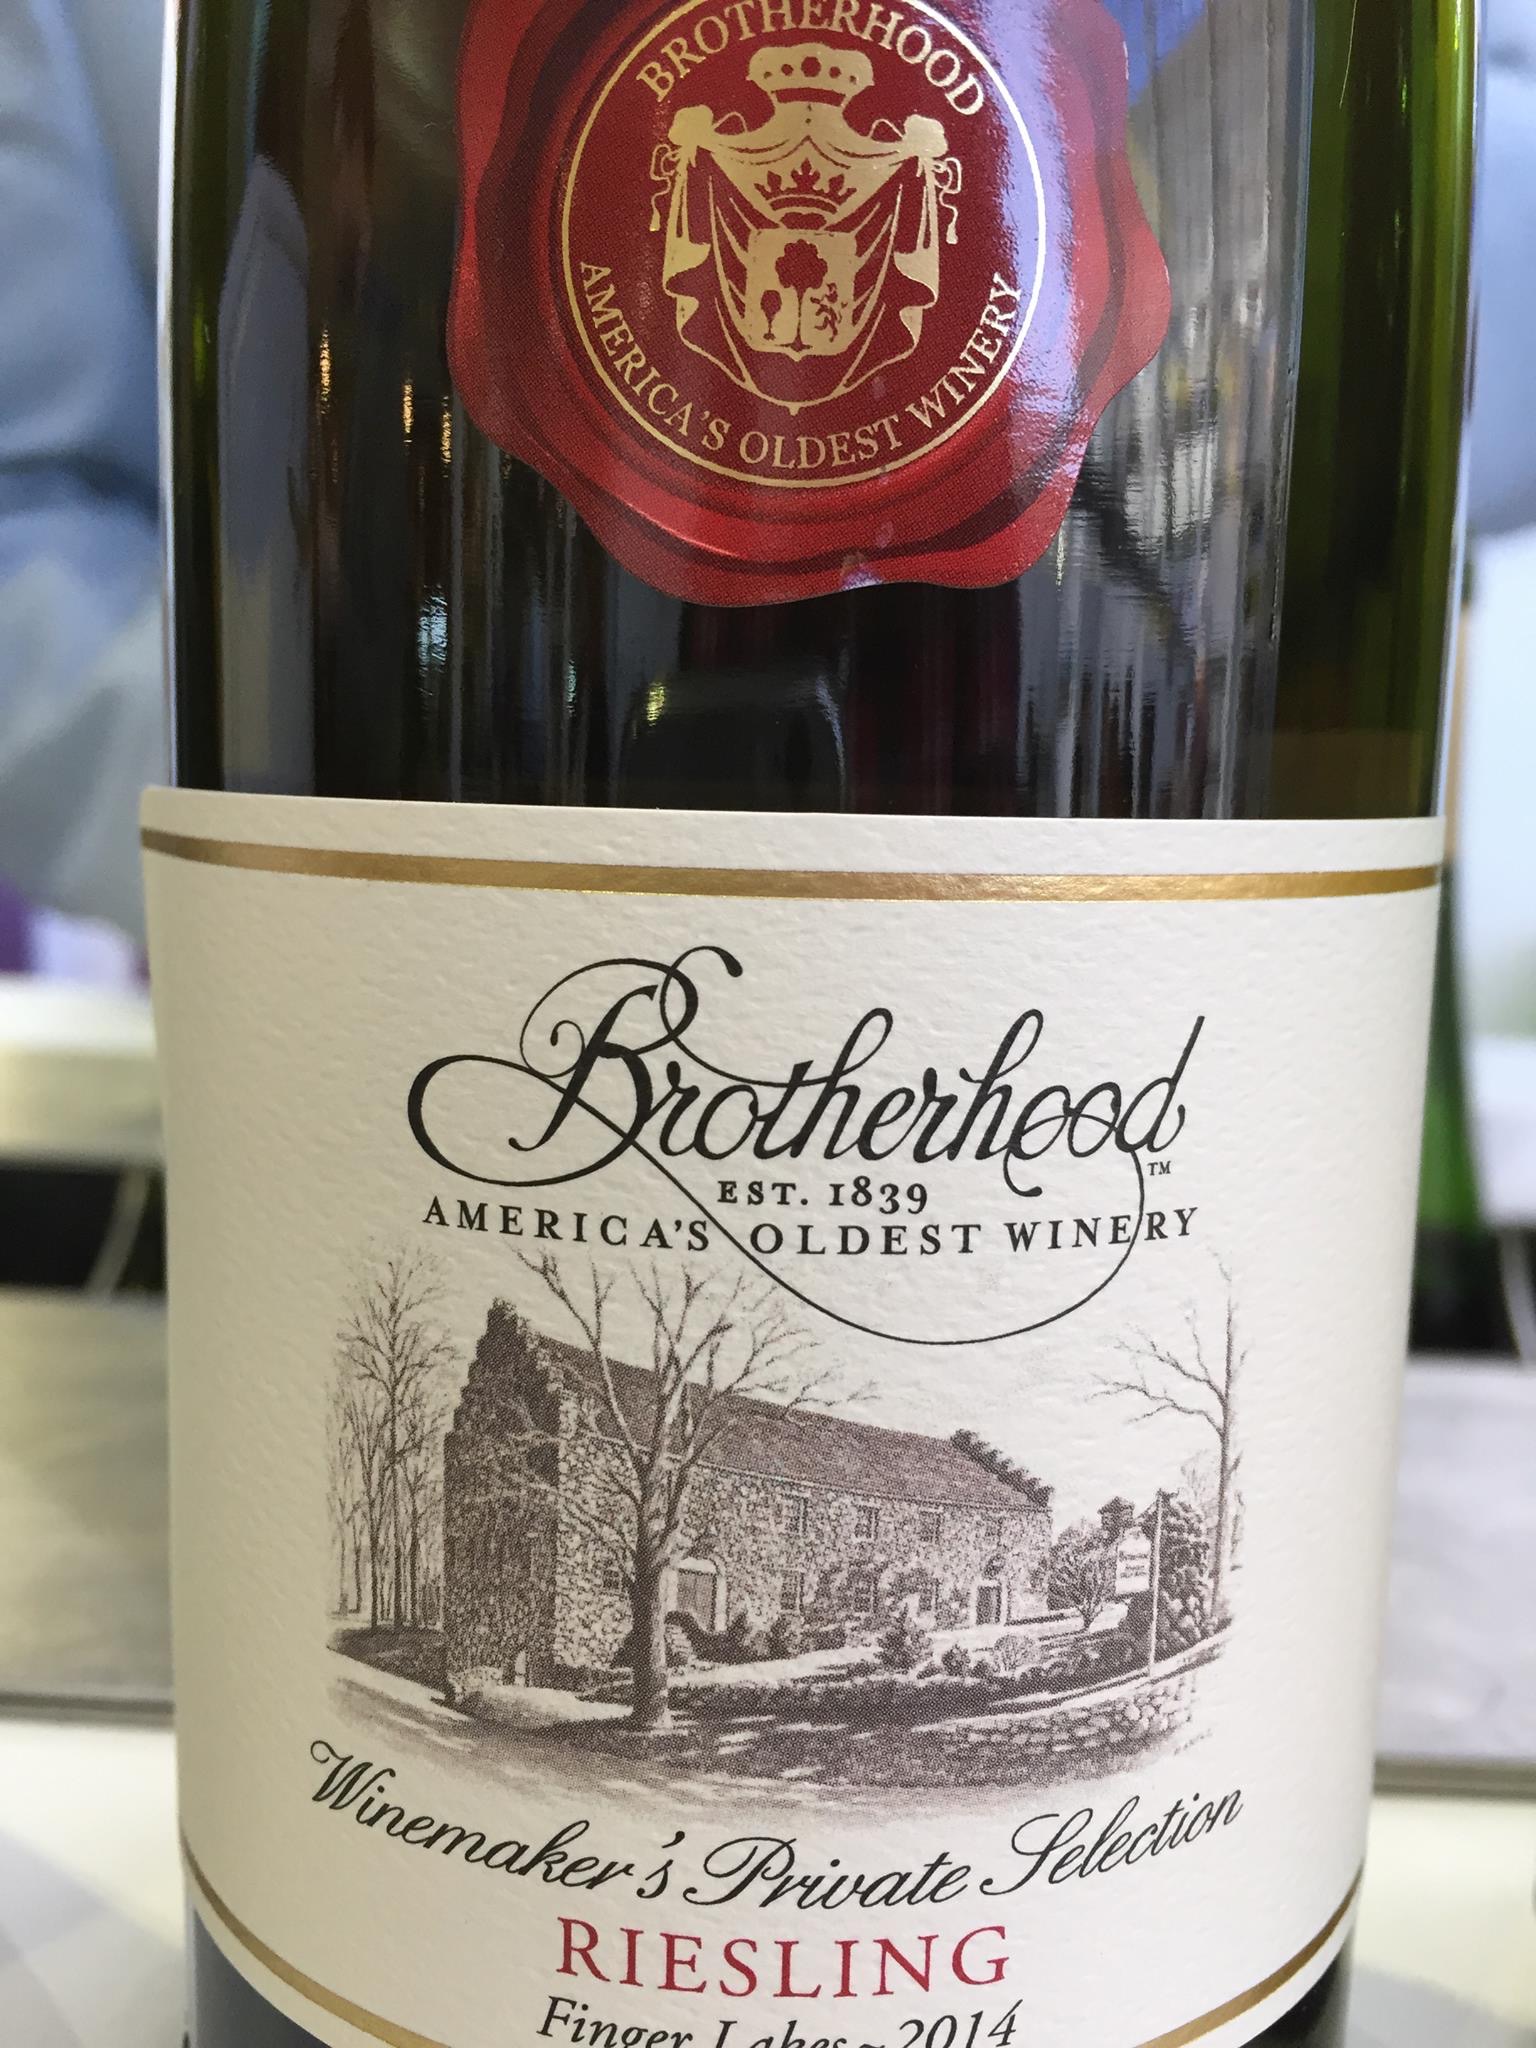 Brotherhood – Riesling 2014 – Winemaker’s Private Selection – Finger Lakes